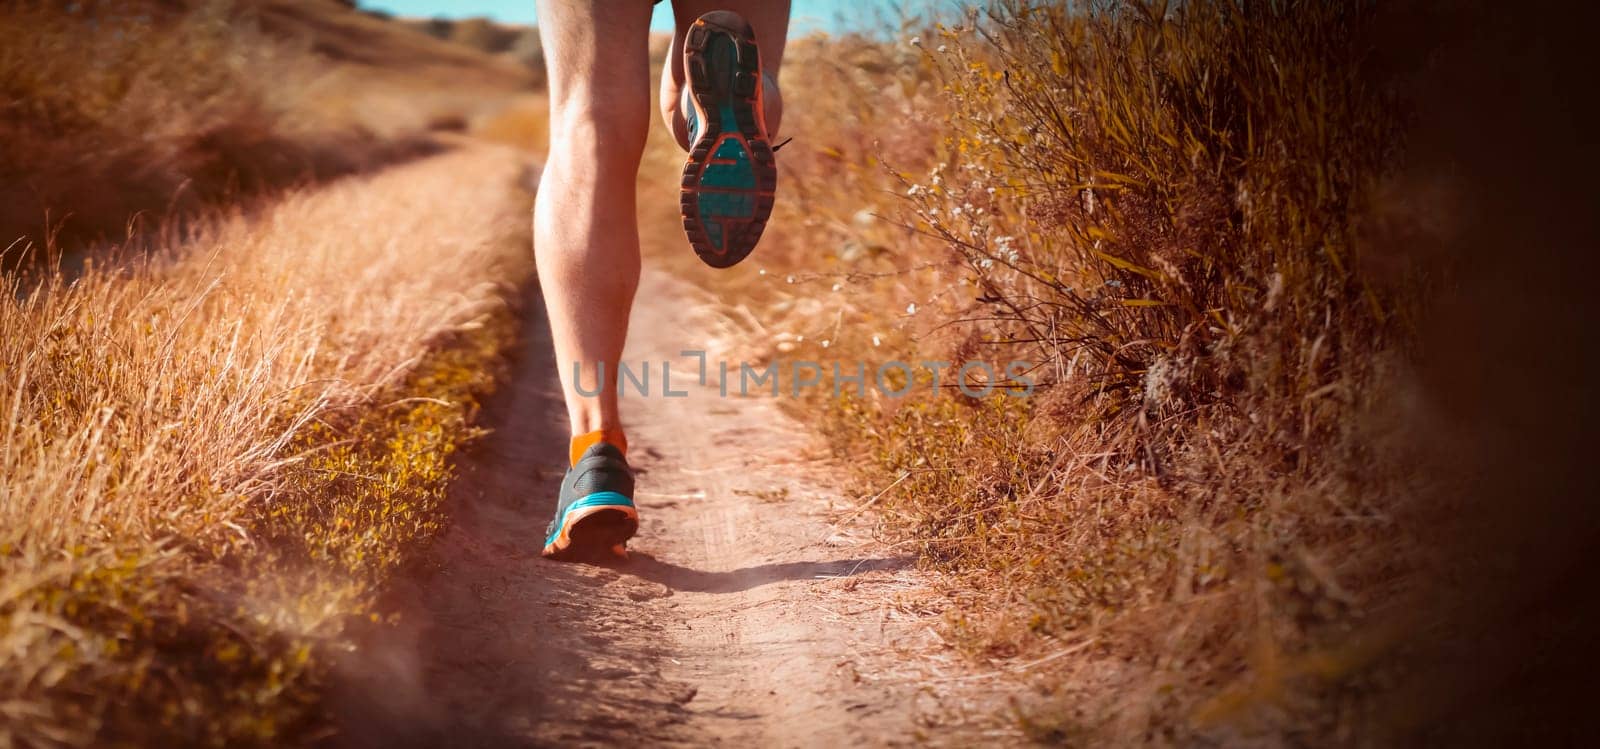 Athlete runner legs running on a close-up of a trail across a field on a shoe. Fitness and warm-up, young man with sun effect in the background.